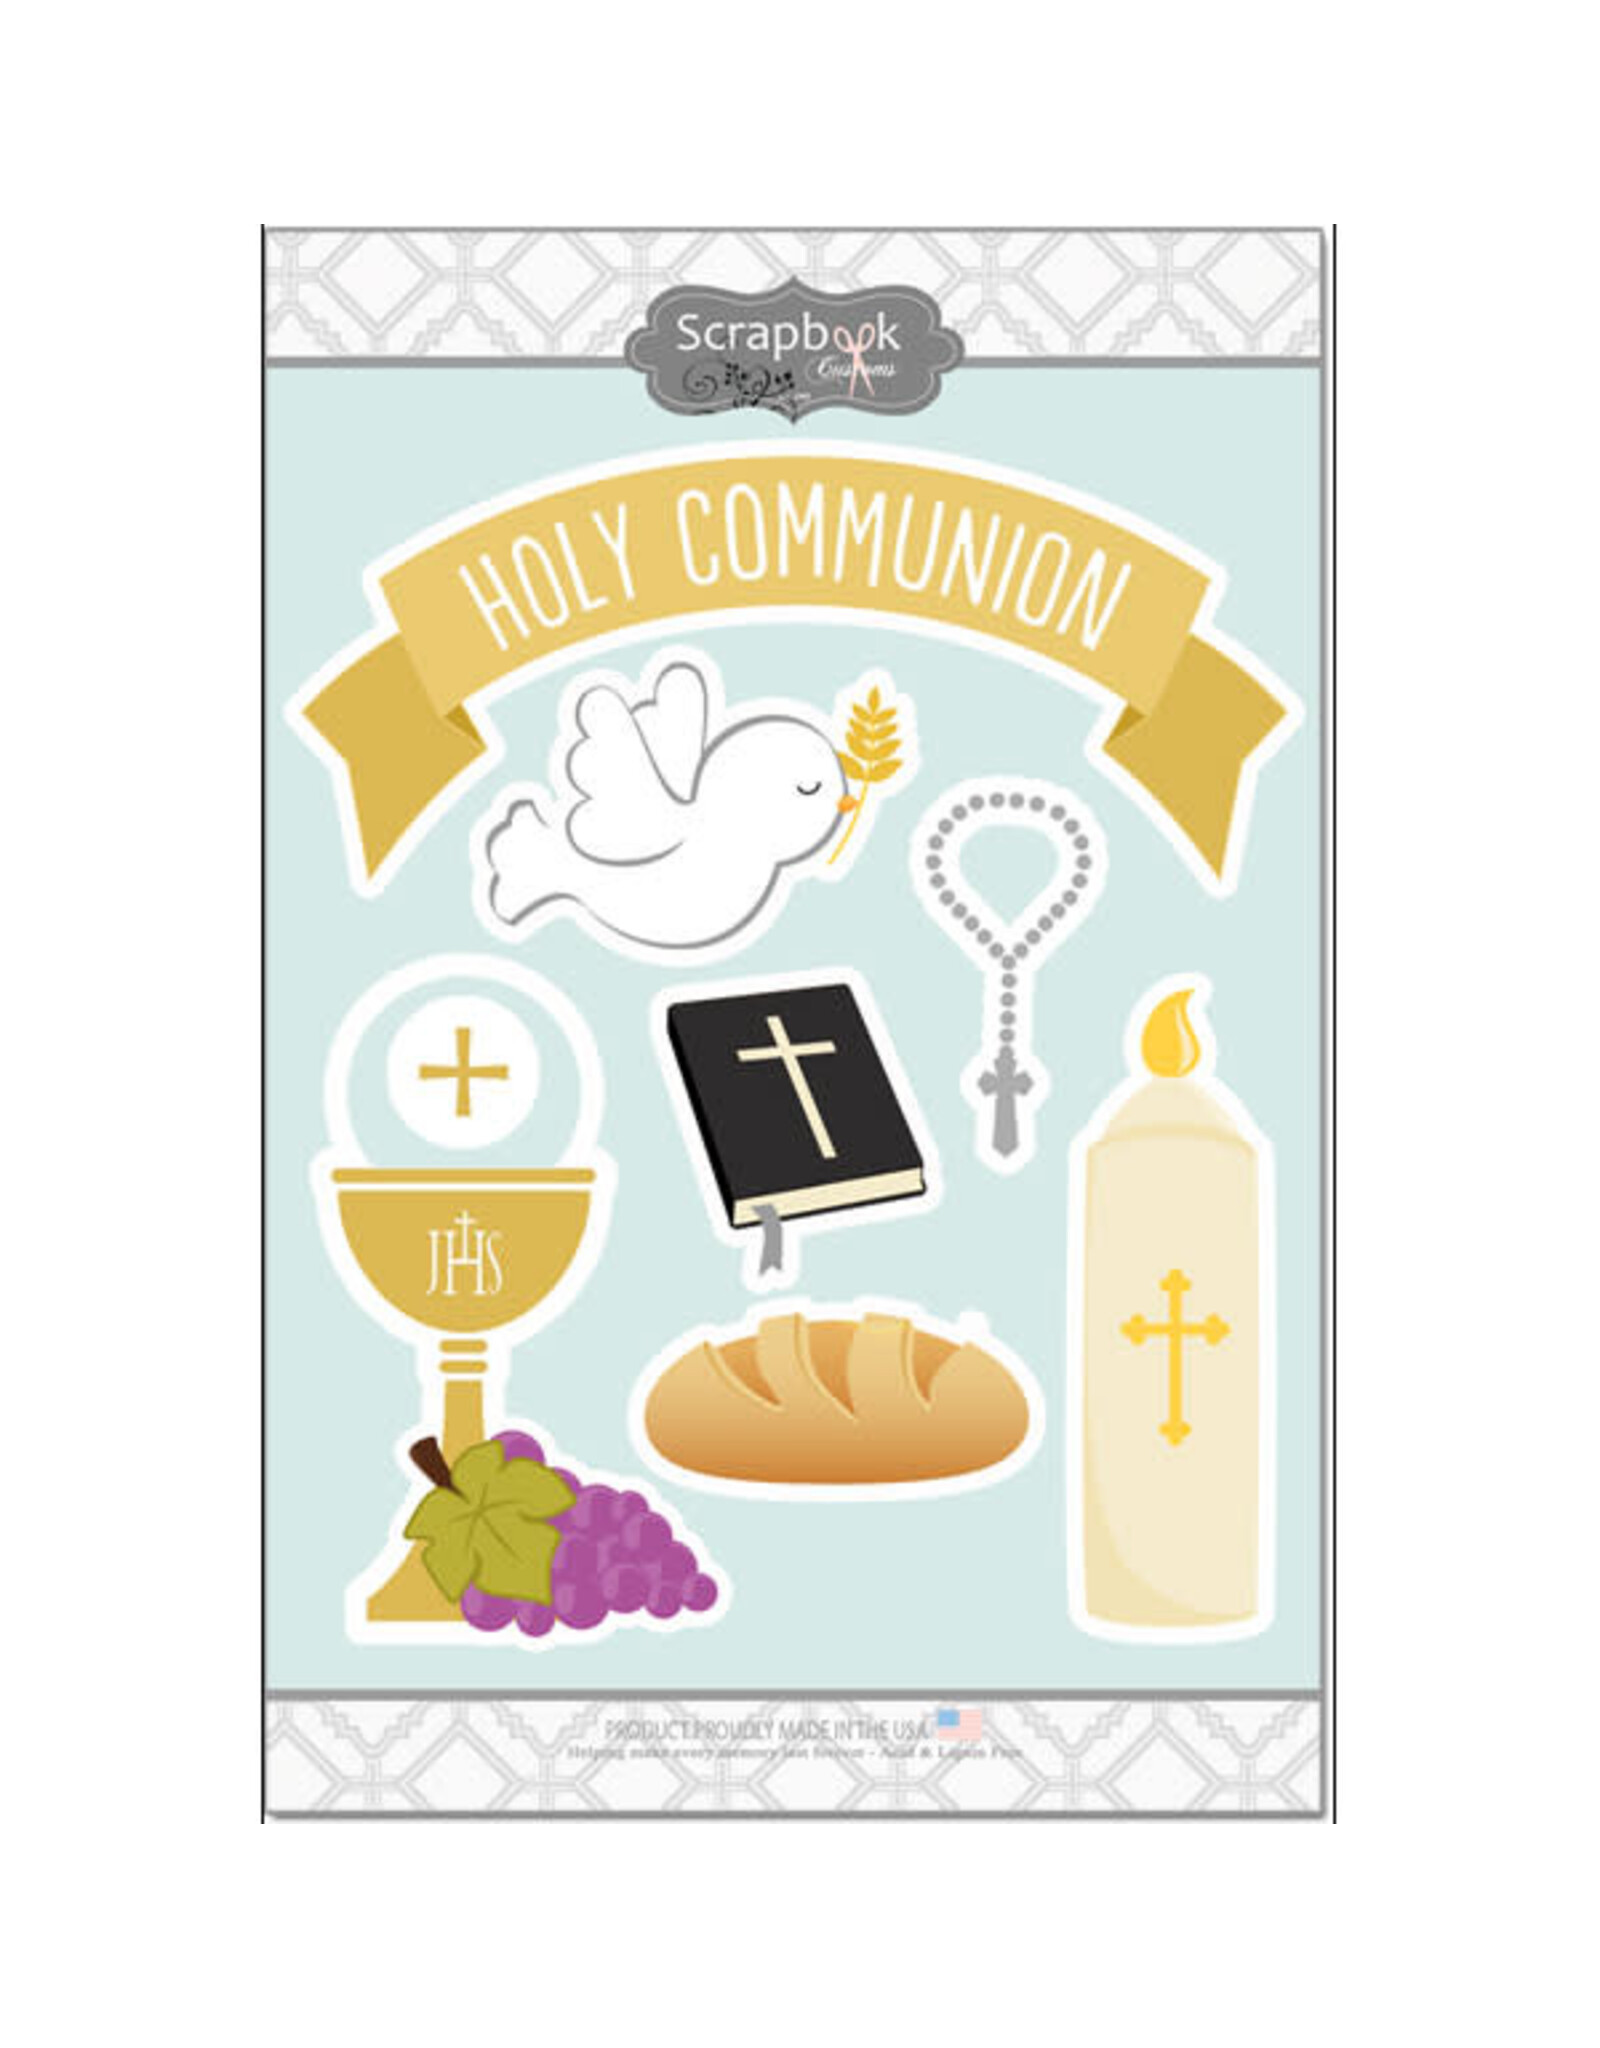 Holy Communion stickers